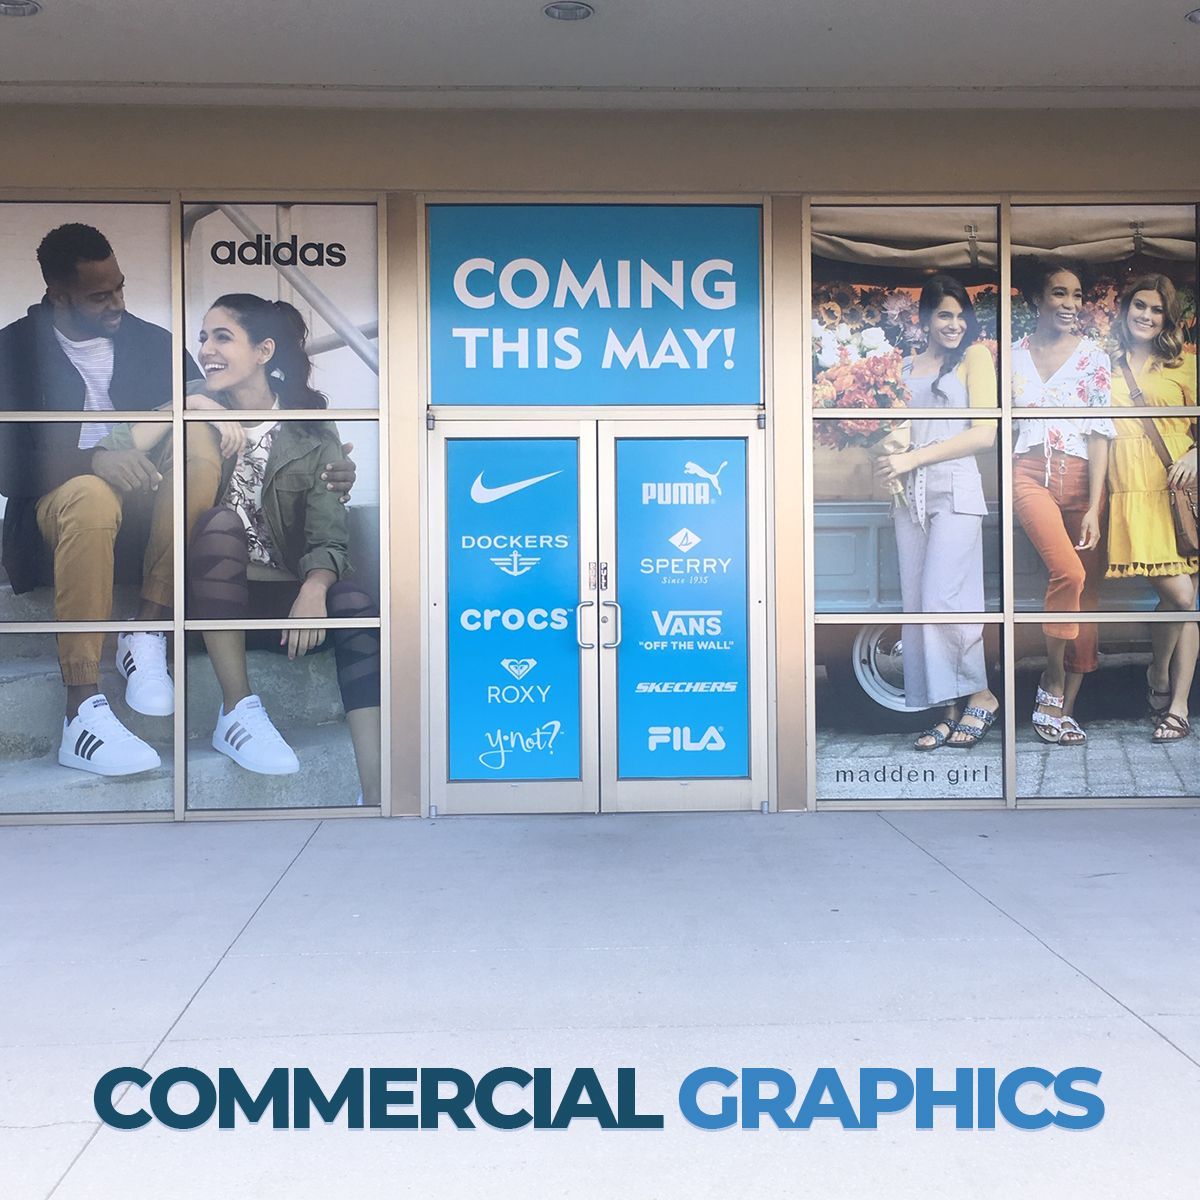 Commercial Graphics